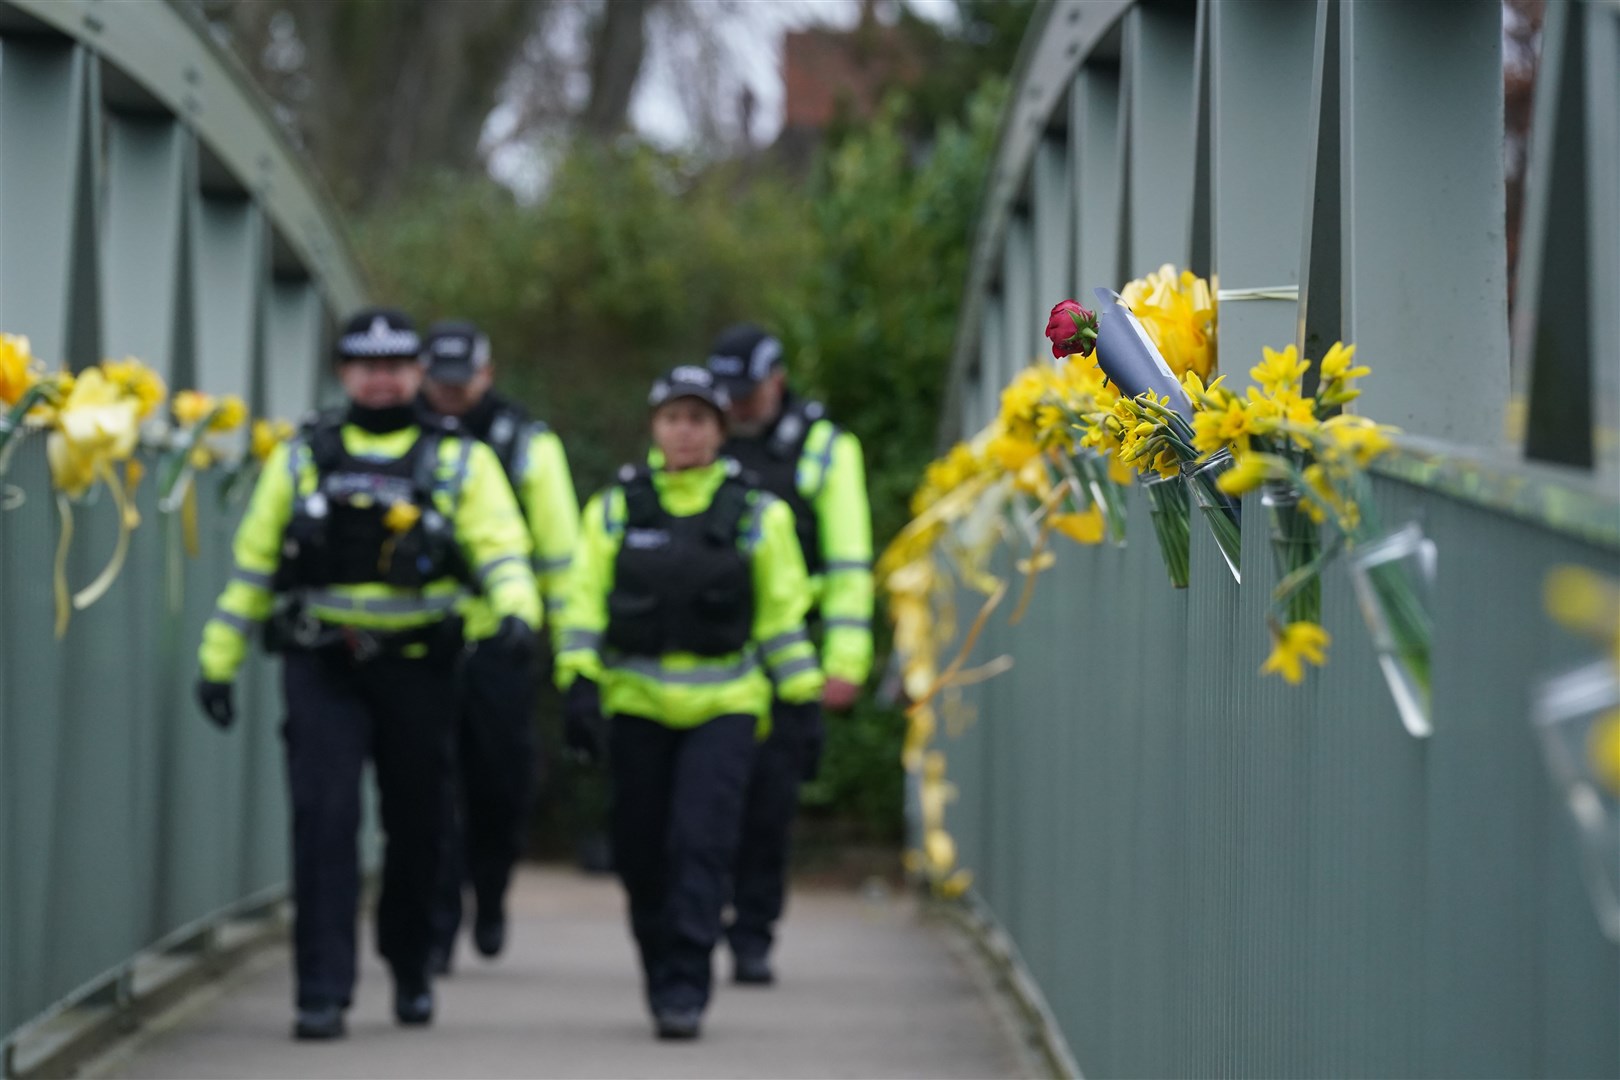 Police officers walk past flowers and yellow ribbons tied to a bridge for Nicola Bulley over the River Wyre in St Michael’s on Wyre, Lancashire, where police recovered a body on Sunday (Owen Humphreys/PA)